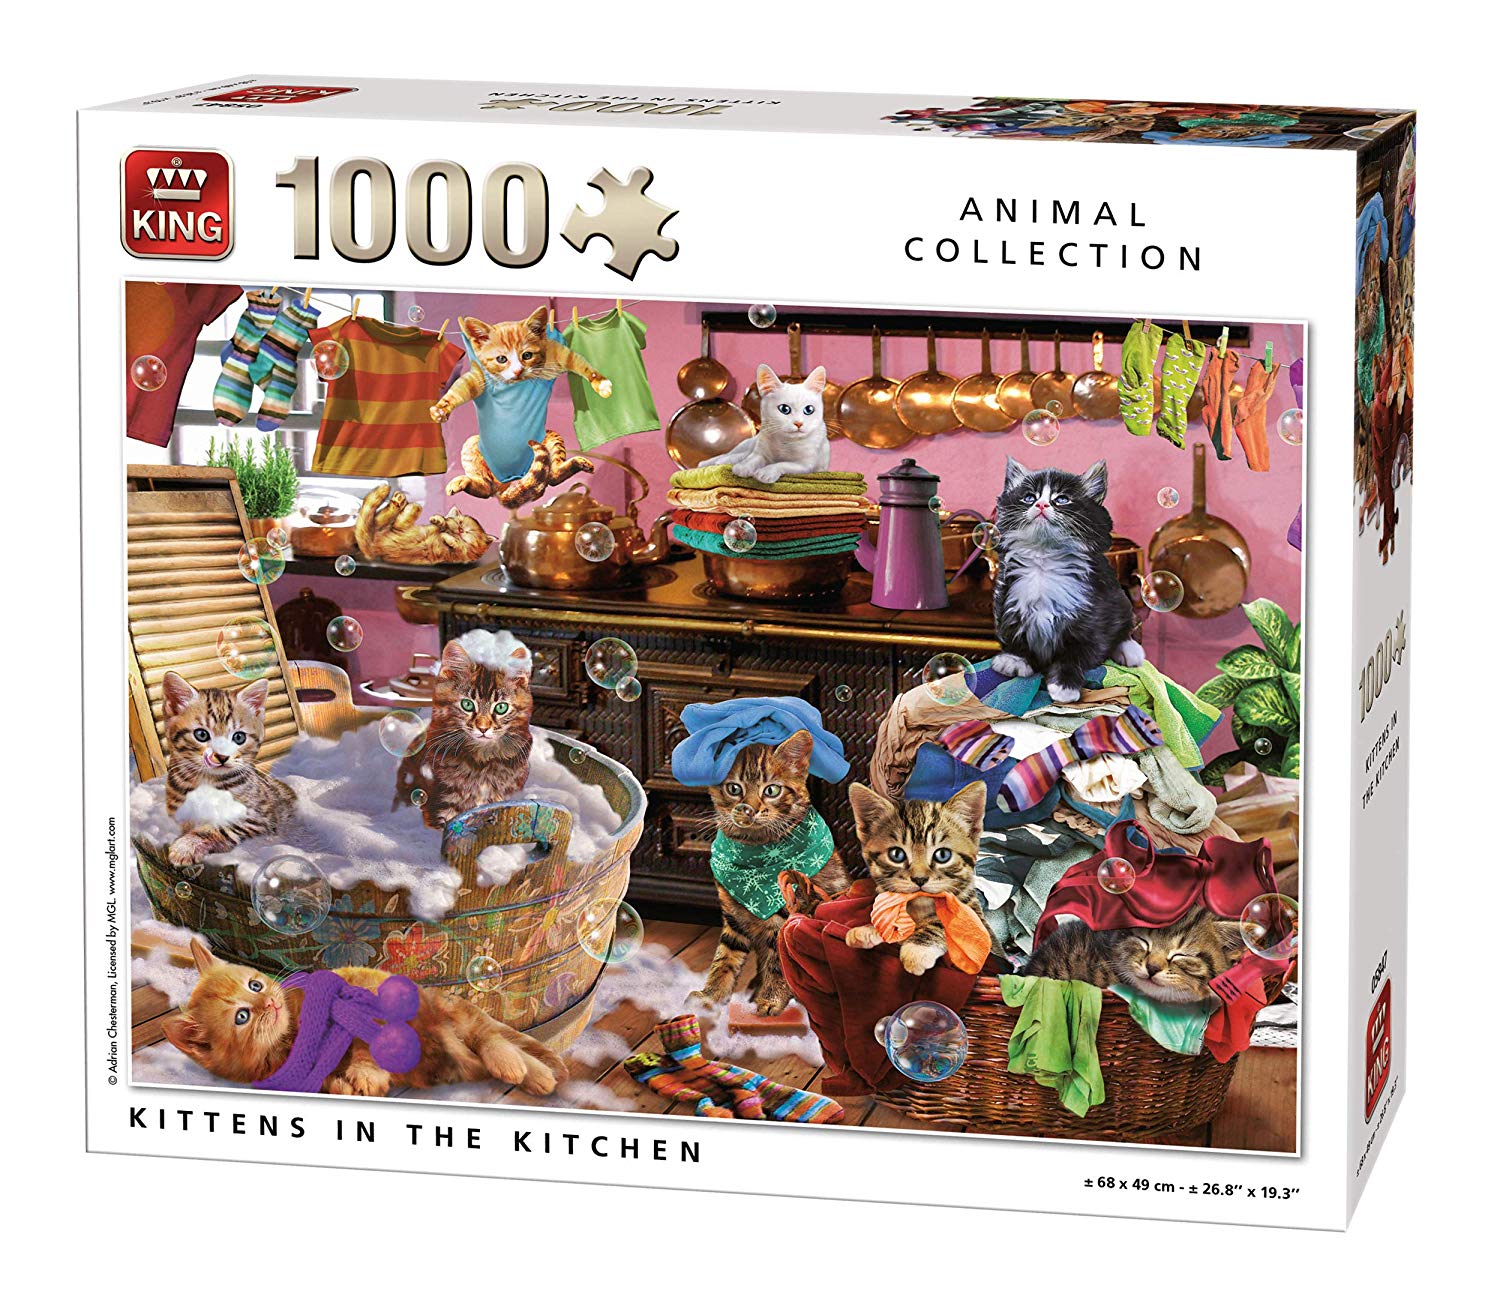 The Coronation of the Alps, 1000 Pcs Jigsaw Puzzle by Clementoni – Prestige  Puzzles